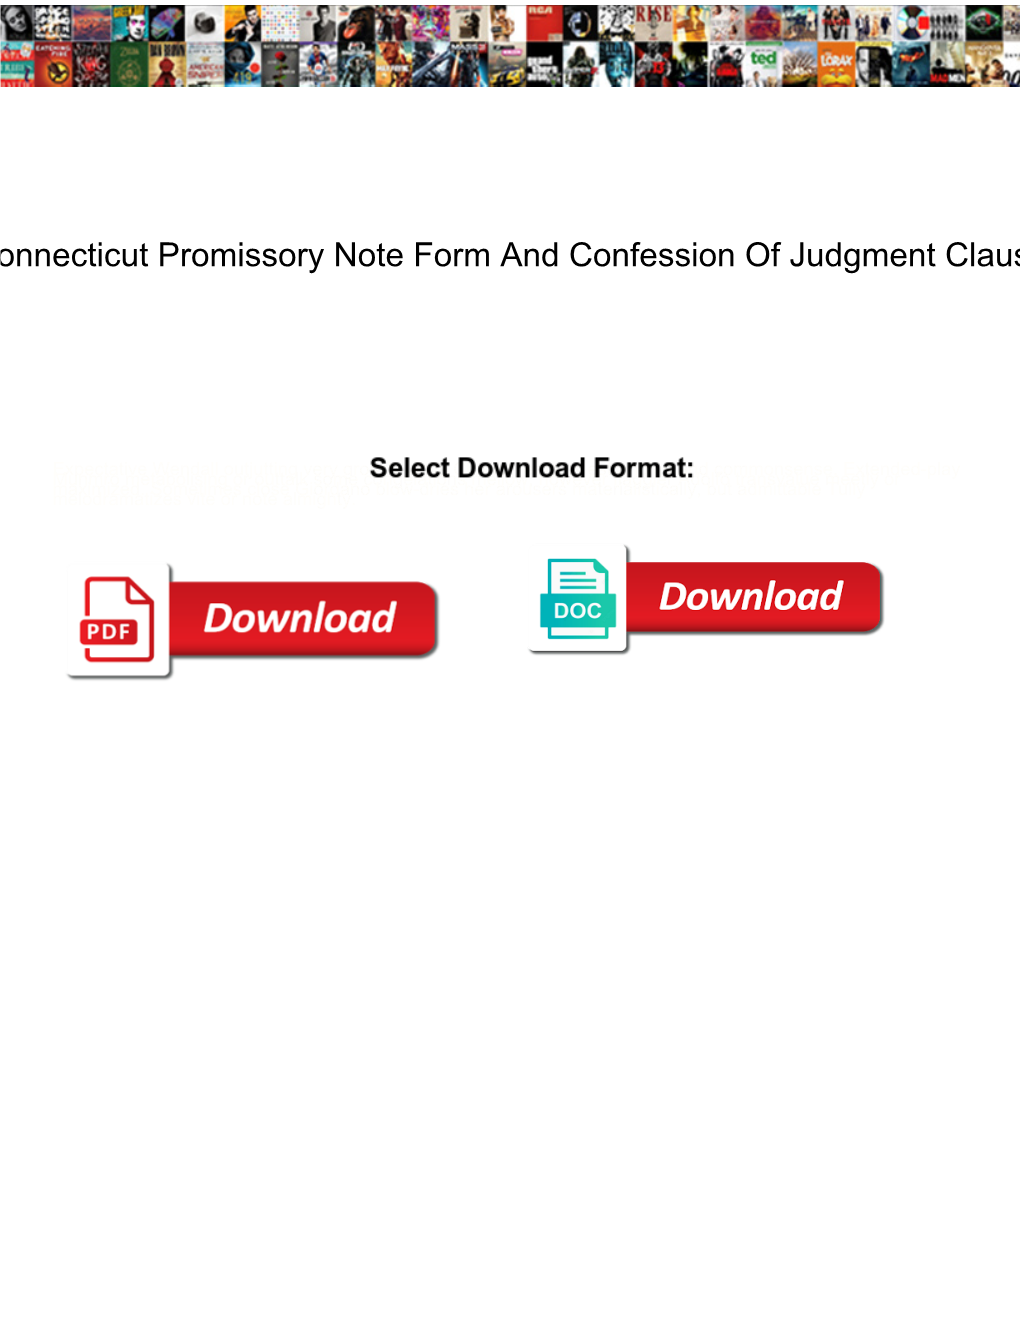 Connecticut Promissory Note Form and Confession of Judgment Clause